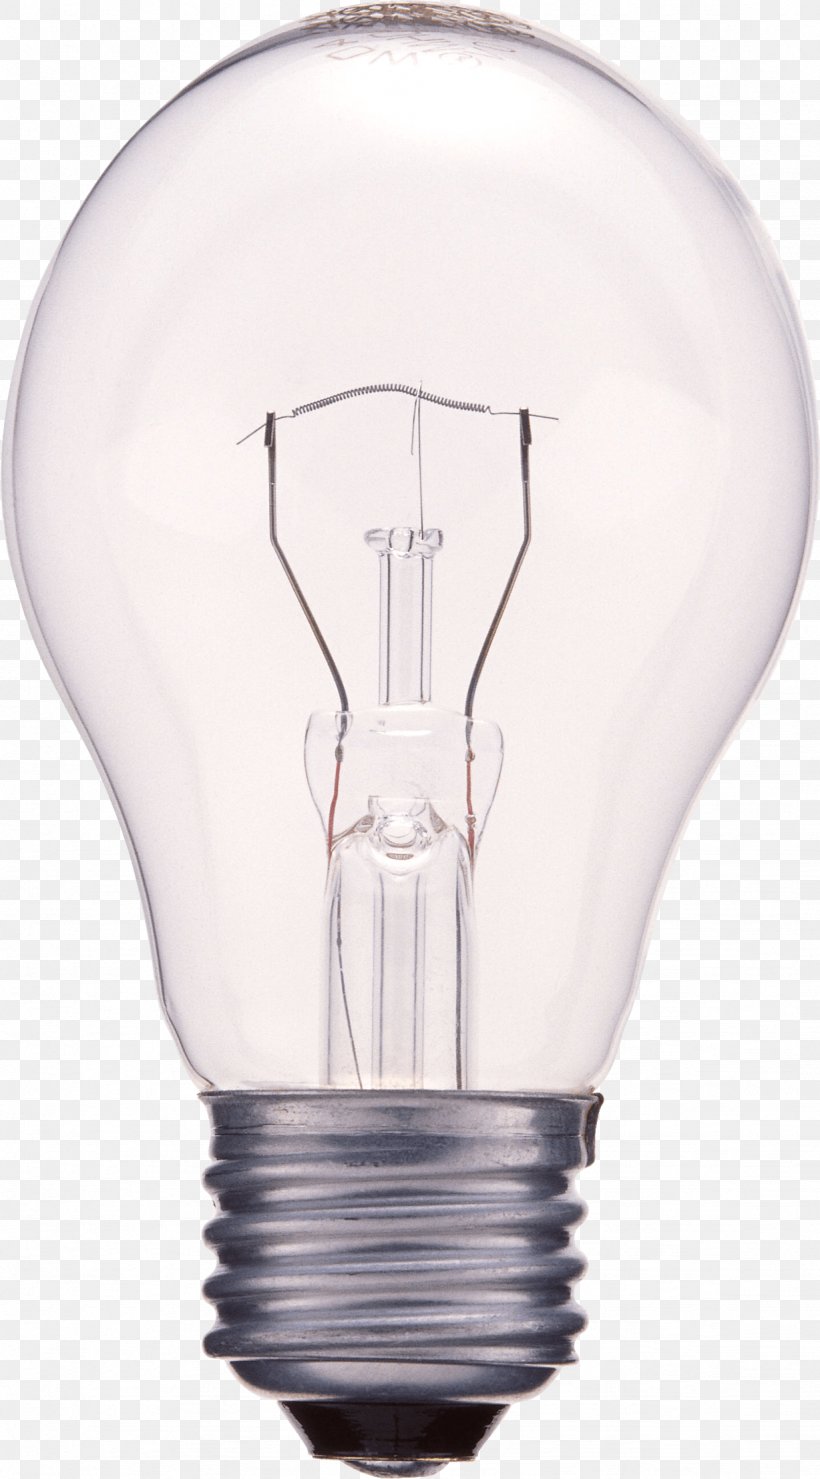 Incandescent Light Bulb Hard And Soft Light Background Light Stock Photography, PNG, 1228x2216px, Light, Depositphotos, Incandescent Light Bulb, Lamp, Light Bulb Download Free